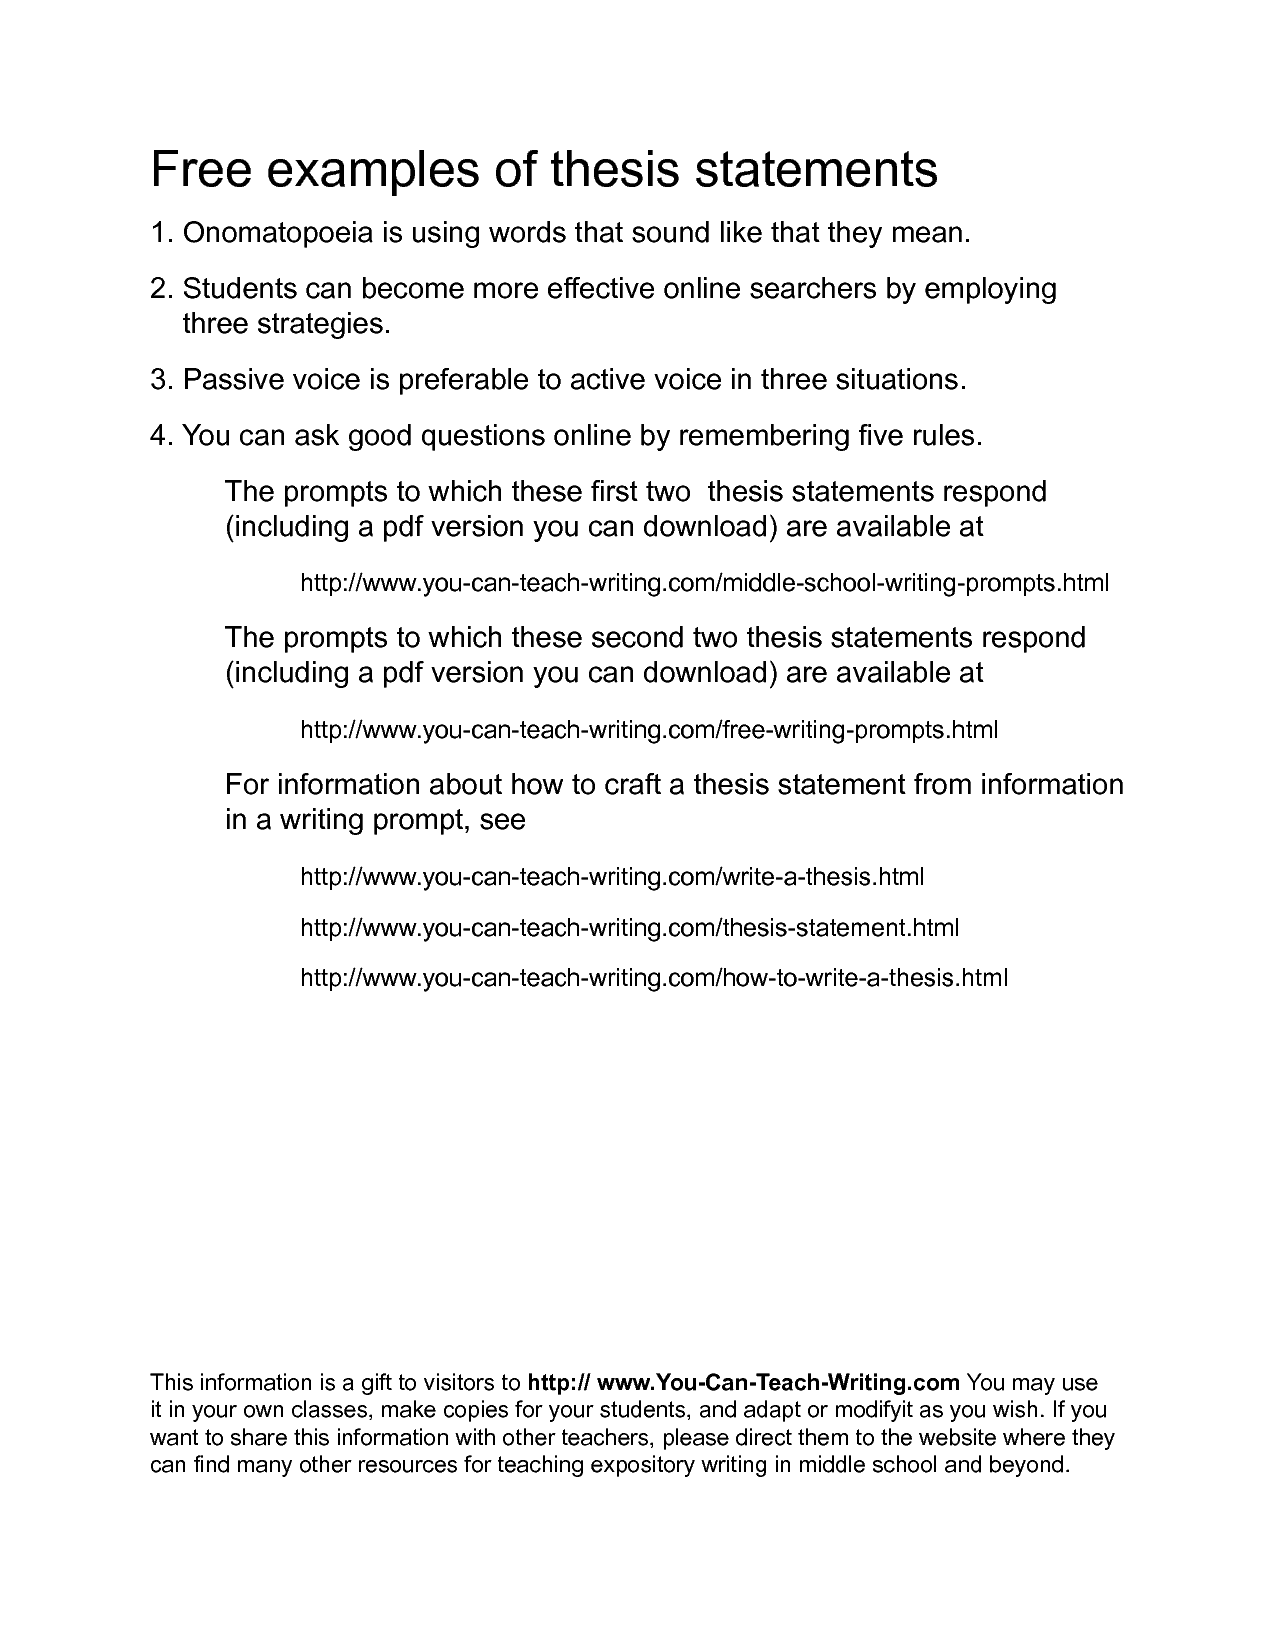 Professional college critical essay assistance